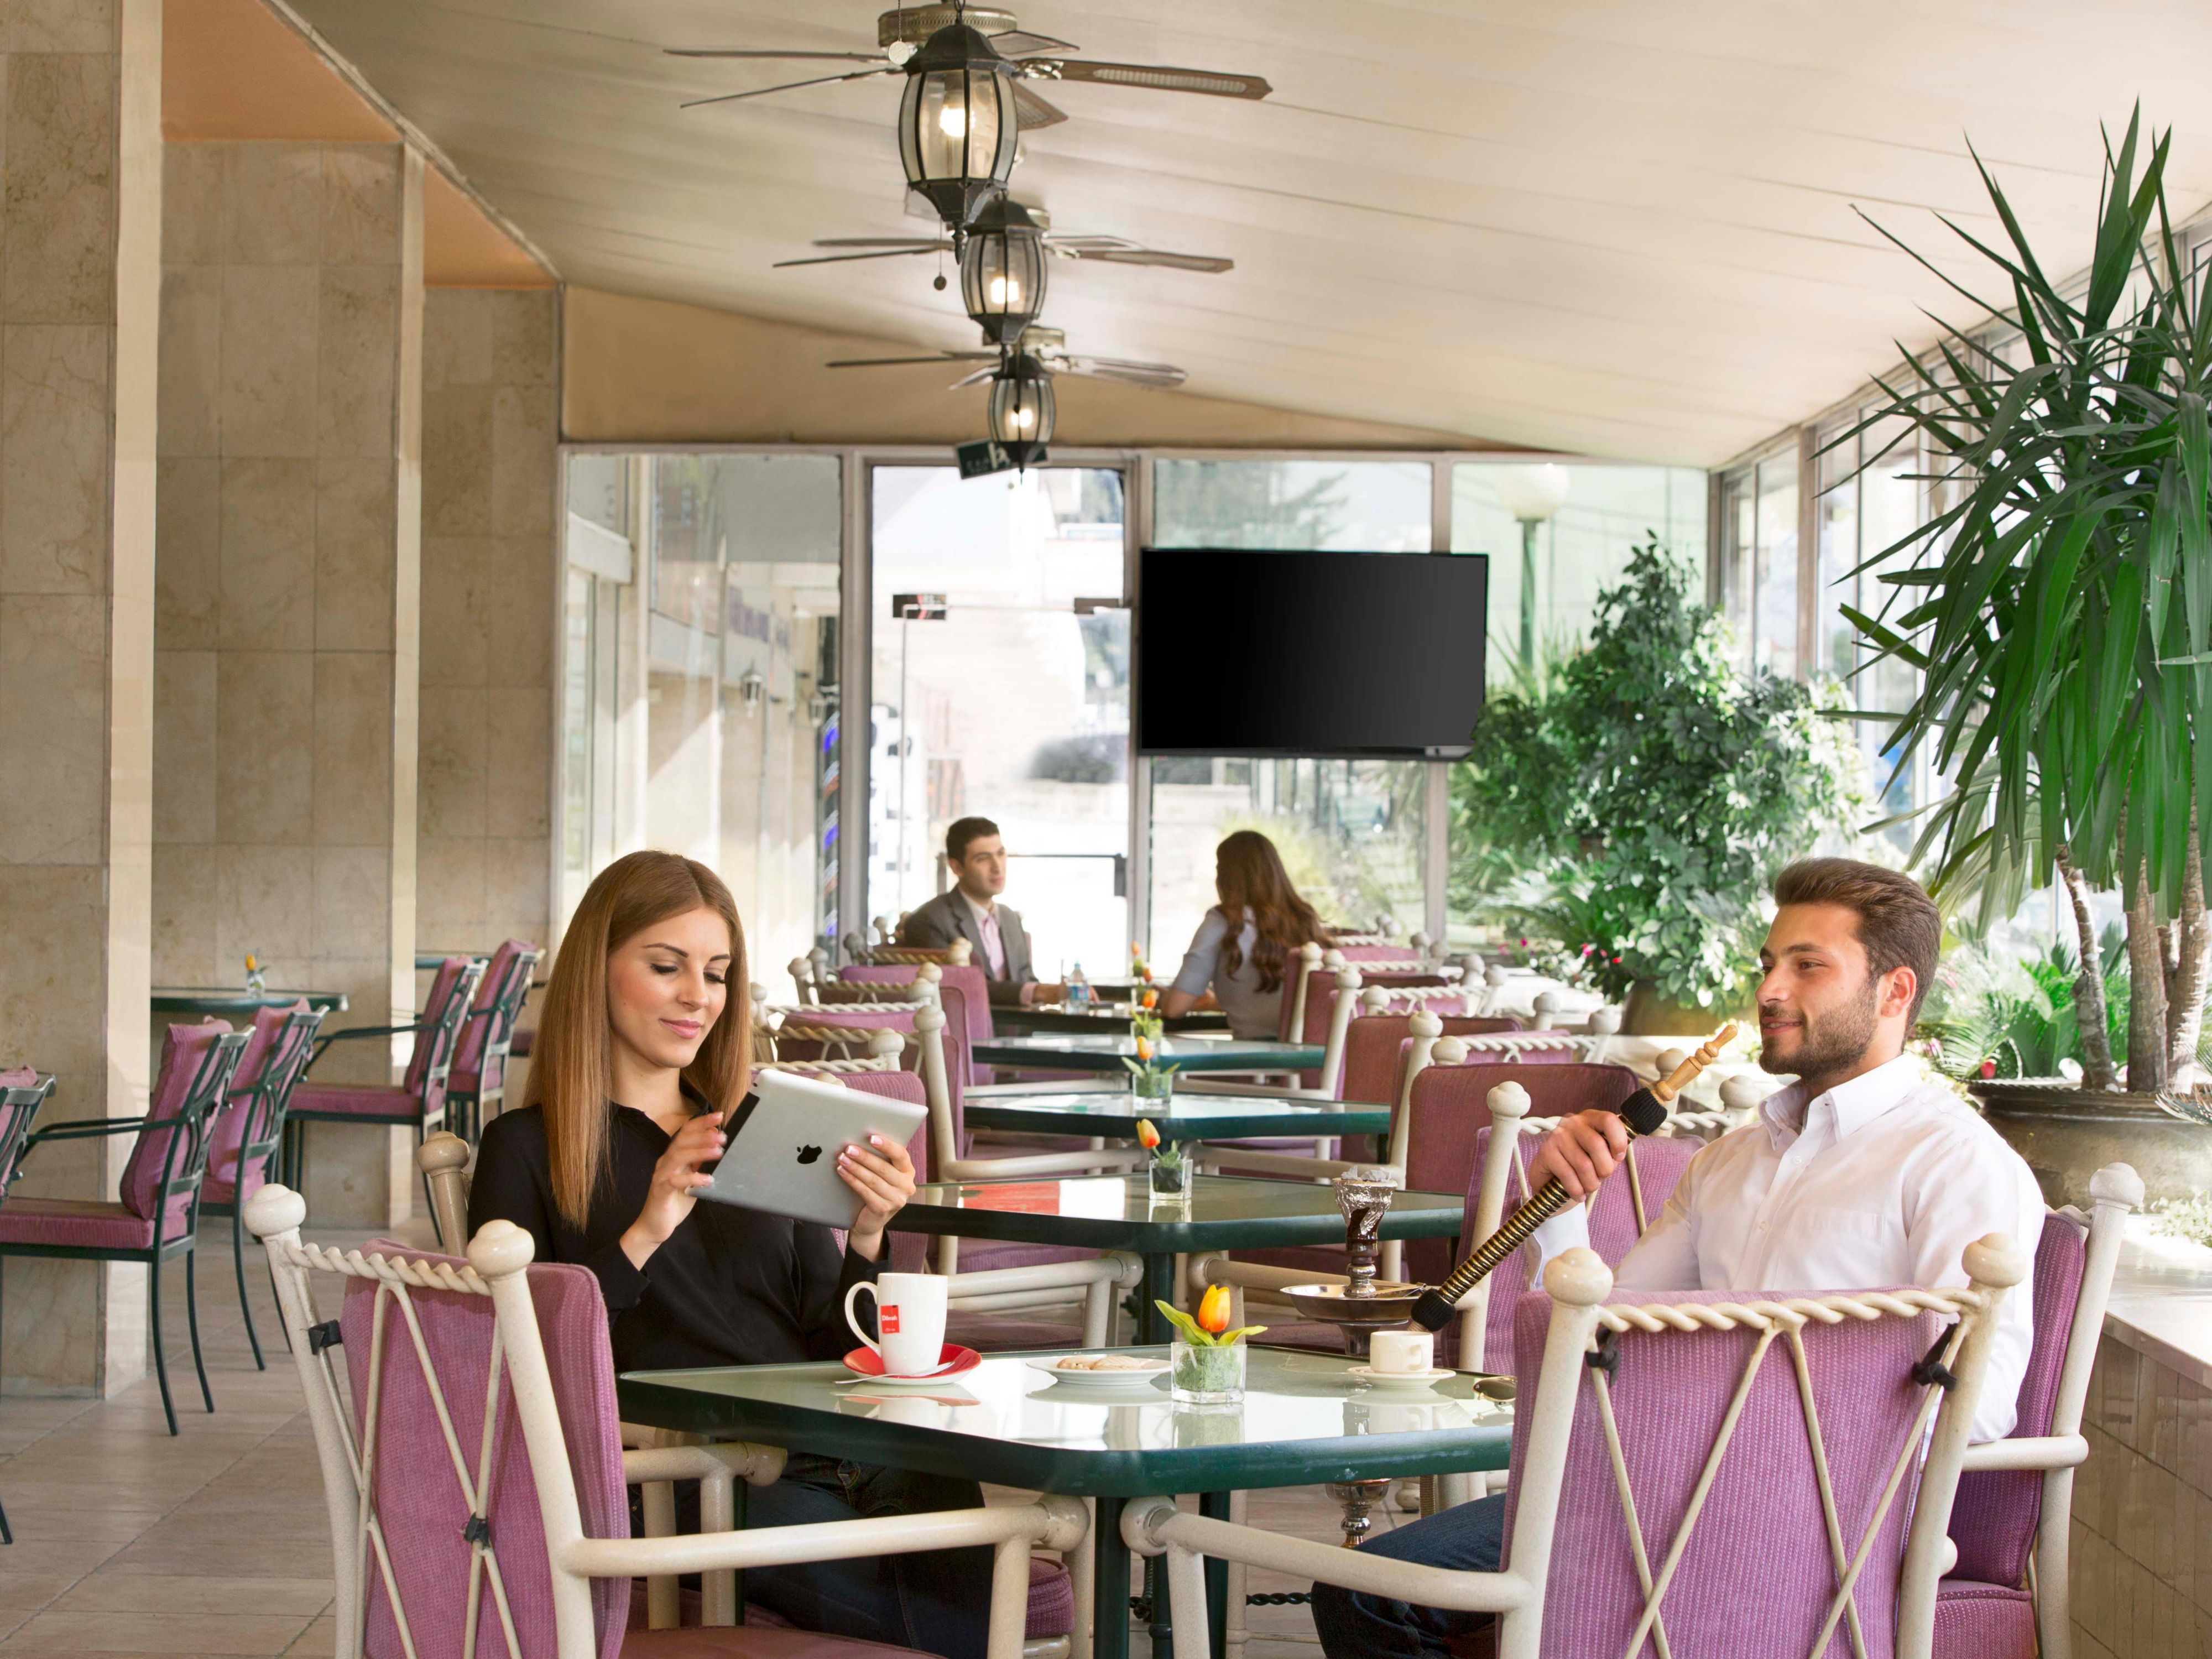 Experience the true essence of Amman at Café Vienna. Indulge in the rich aroma of our robust coffee and savor the delightful cuisine we offer at Café Vienna. Immerse yourself in the warm embrace of our vibrant community as you enjoy the shisha.